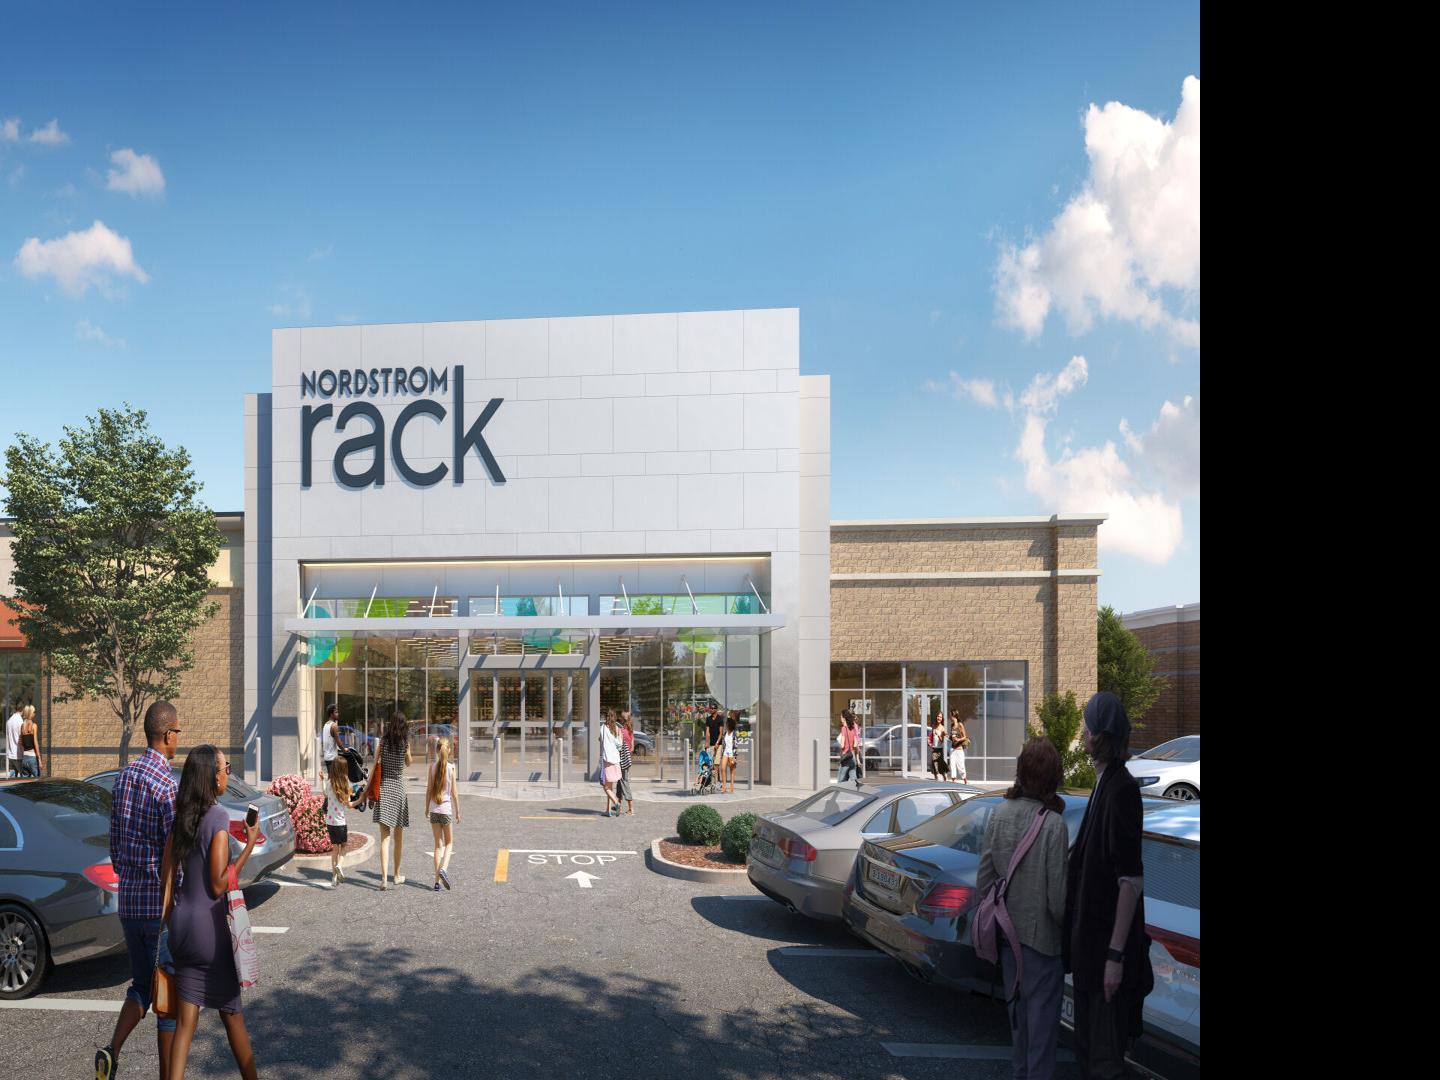 Nordstrom Rack opens today in West Des Moines